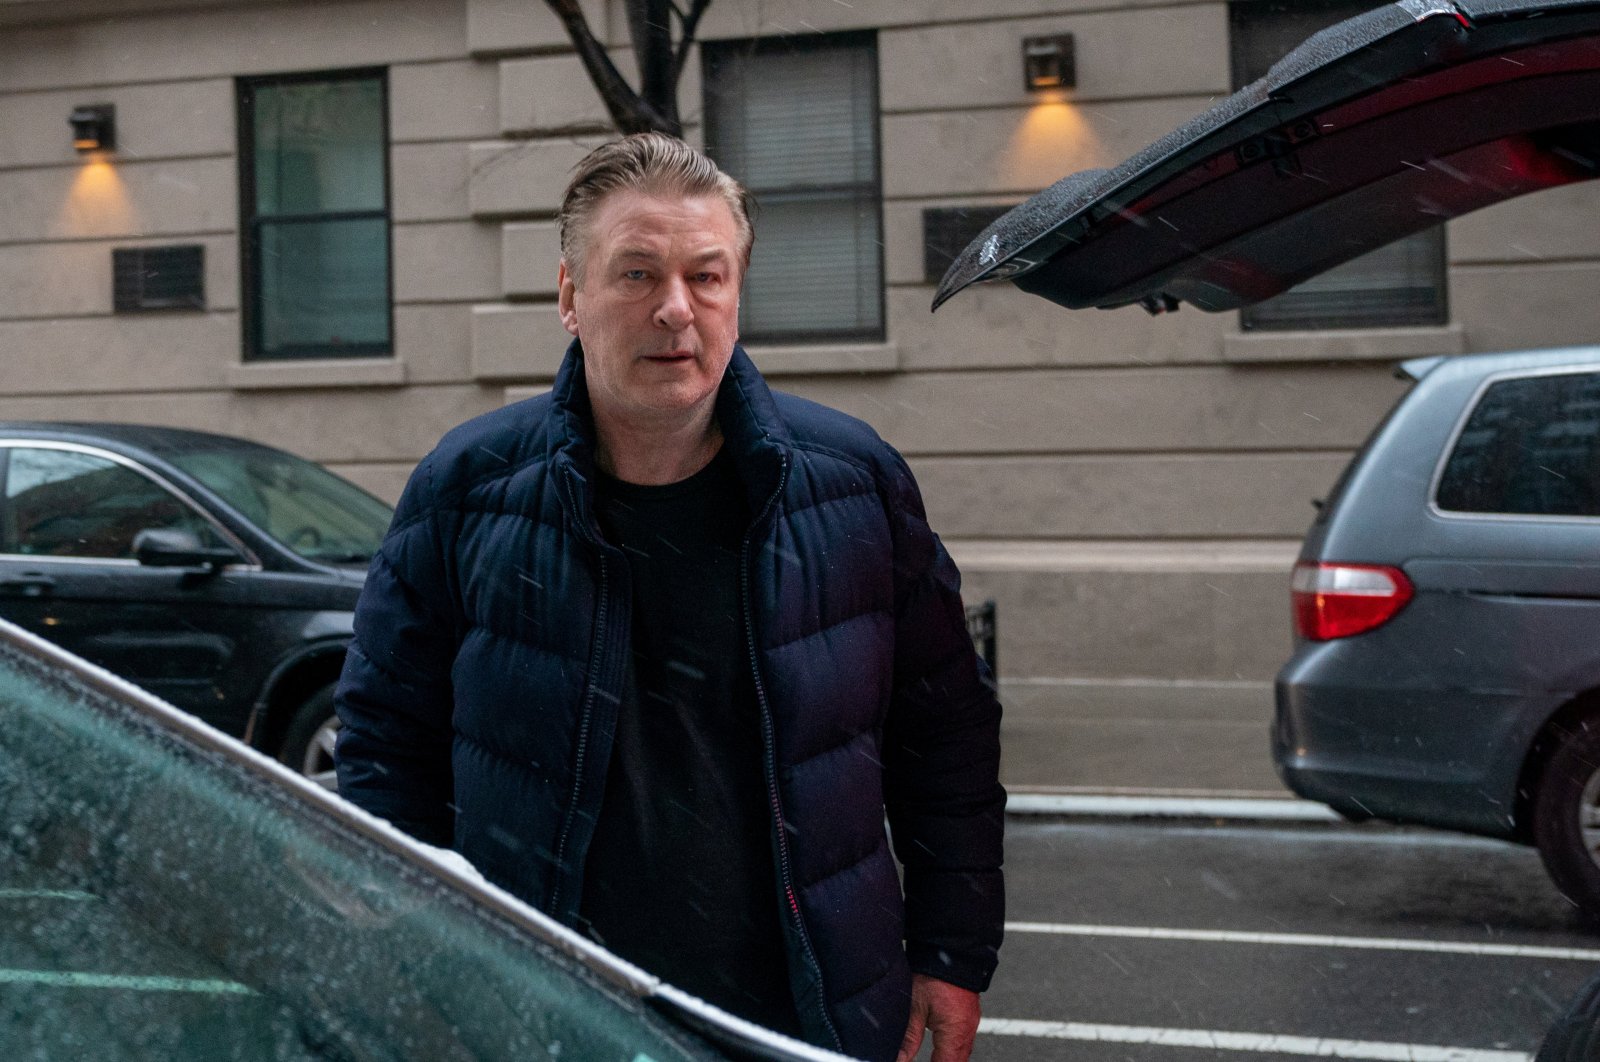 Actor Alec Baldwin departs his home, as he will be charged with involuntary manslaughter for the fatal shooting of cinematographer Halyna Hutchins on the set of the movie &quot;Rust&quot;,  in New York, U.S., Jan. 31, 2023. (Reuters Photo)